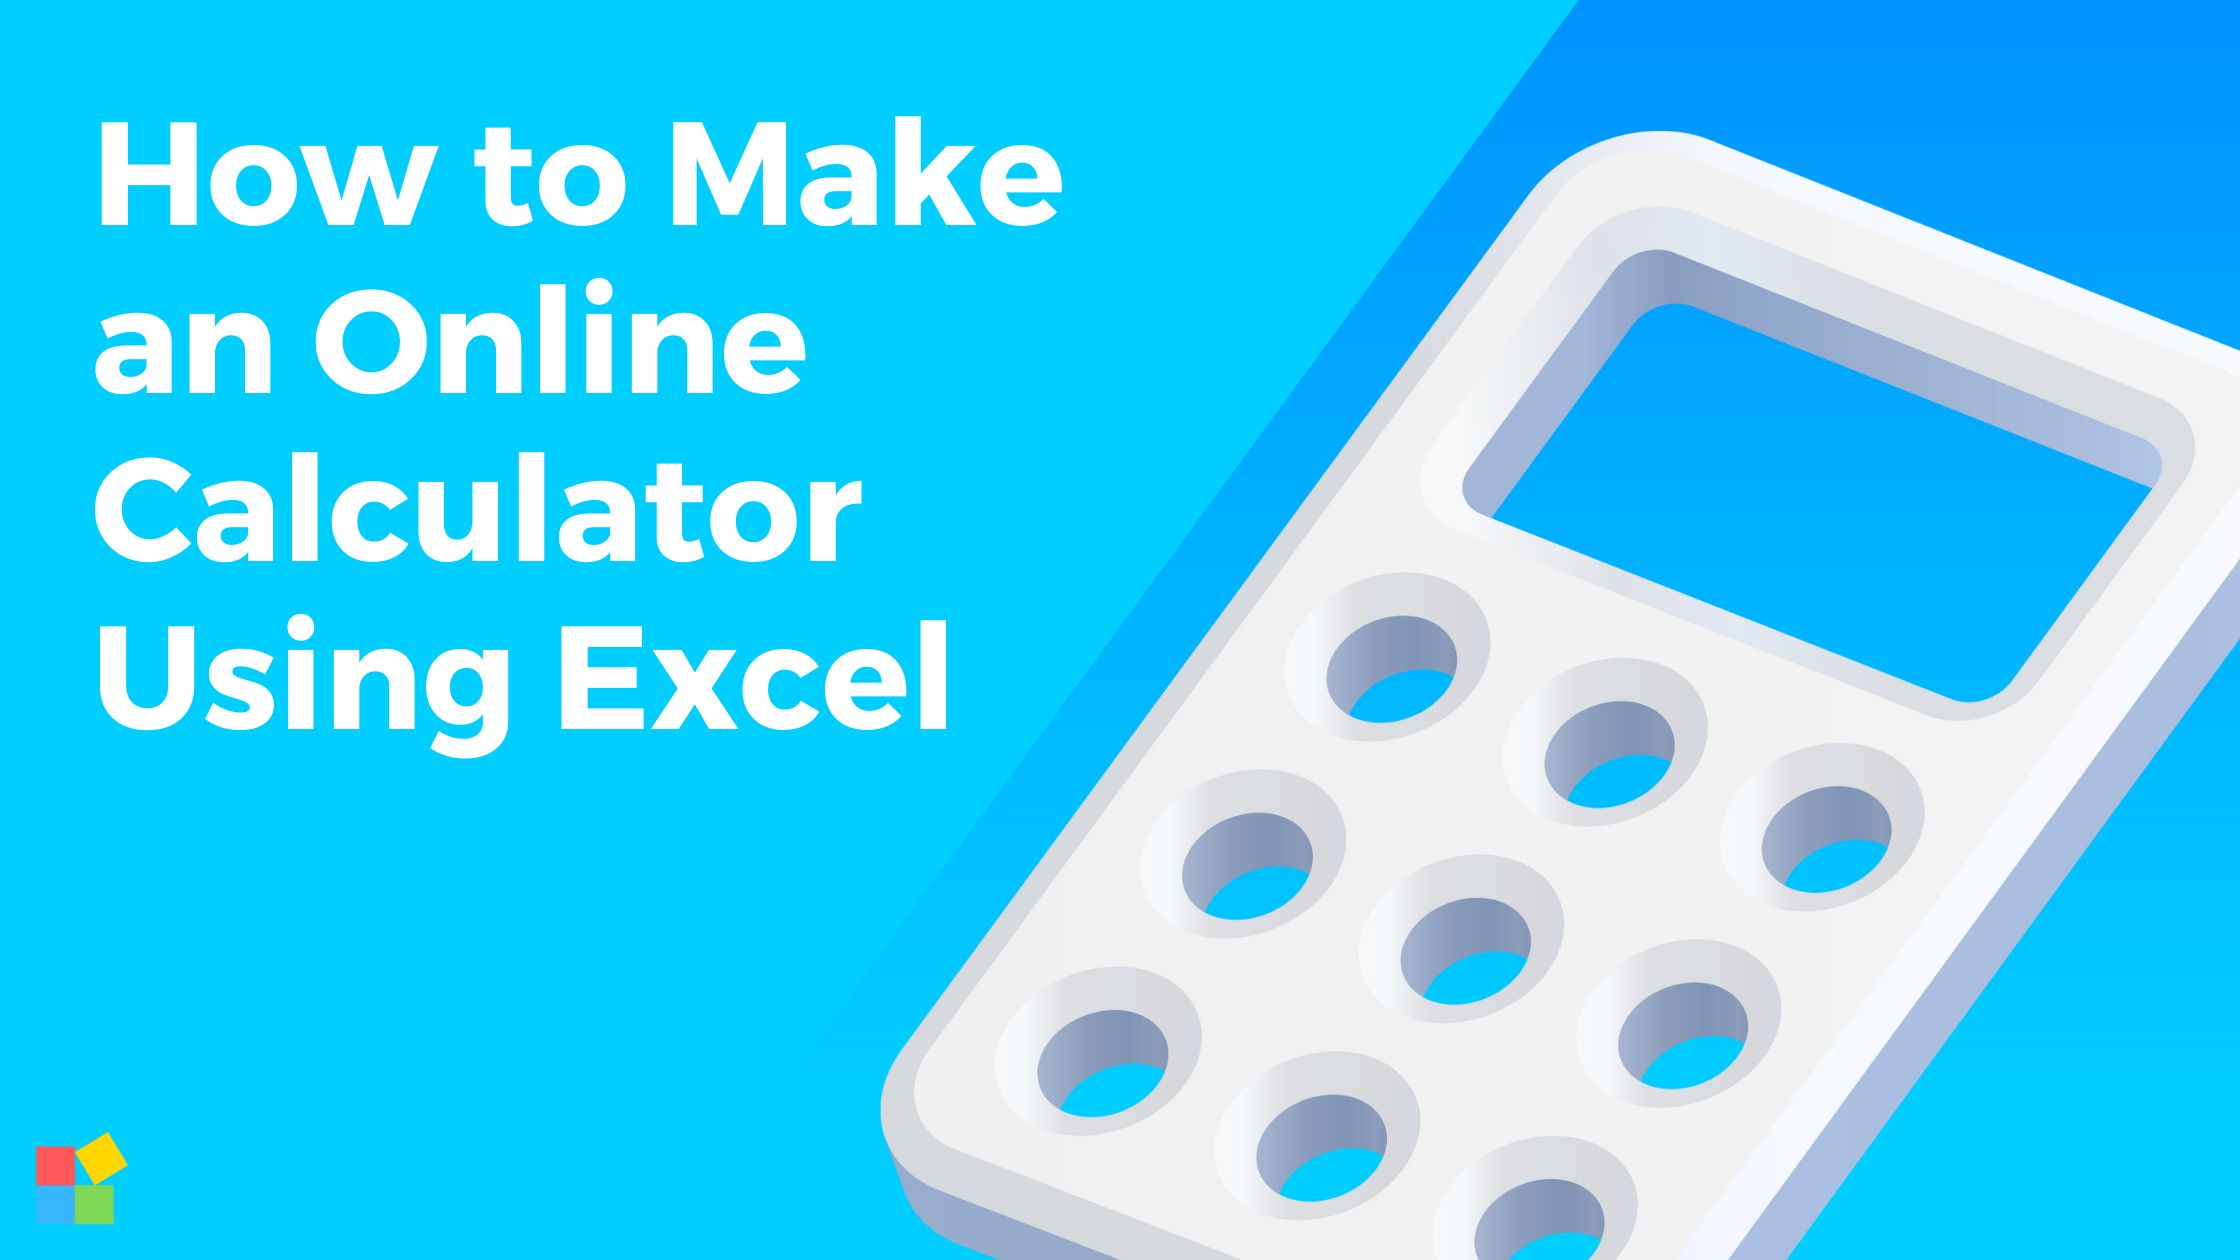 Create an Online Calculator from Excel